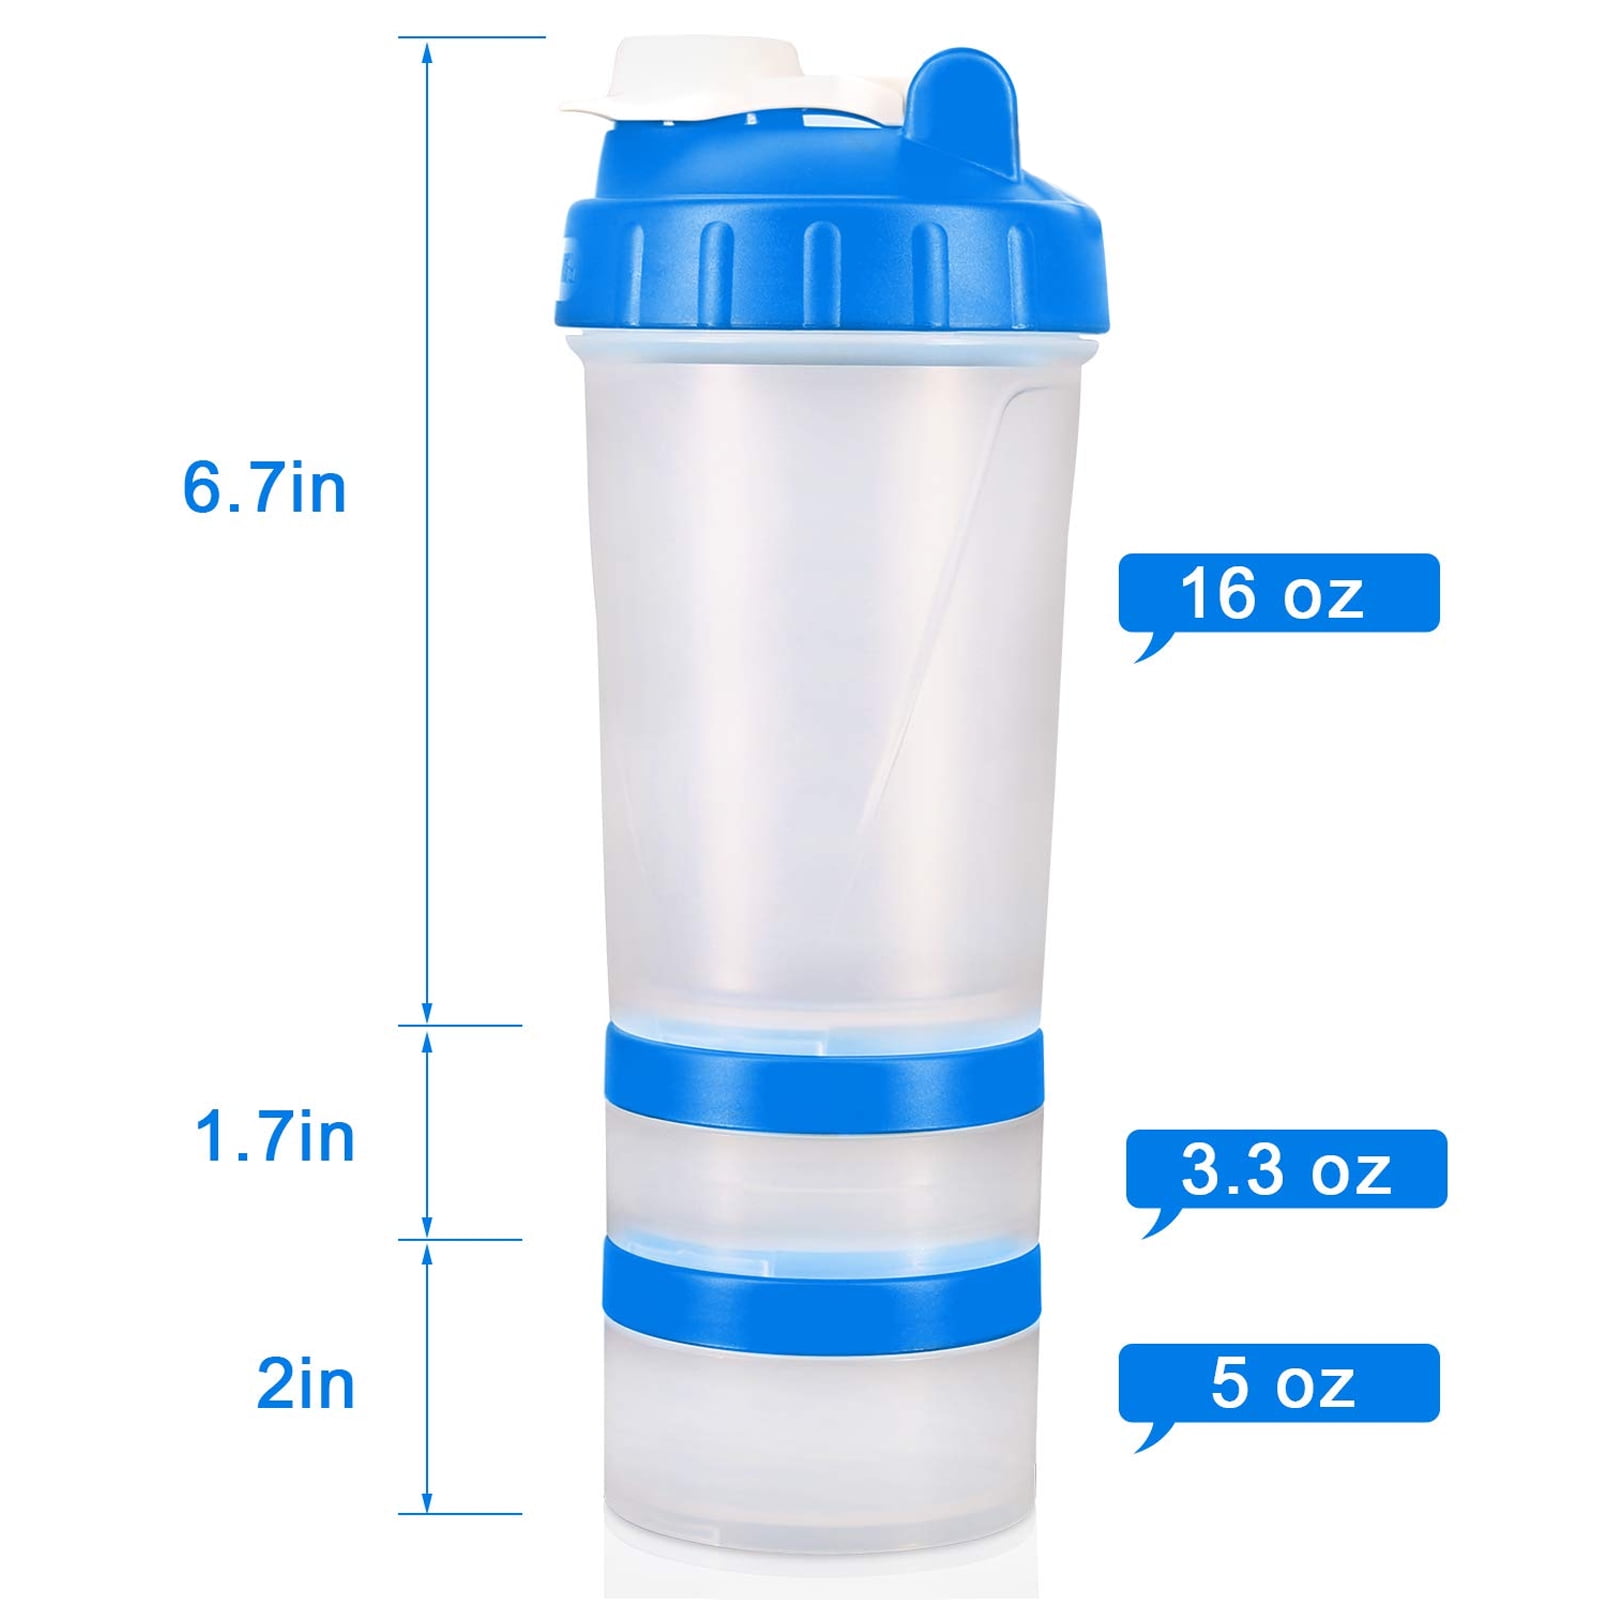 Protein shaker bottle • Compare & see prices now »